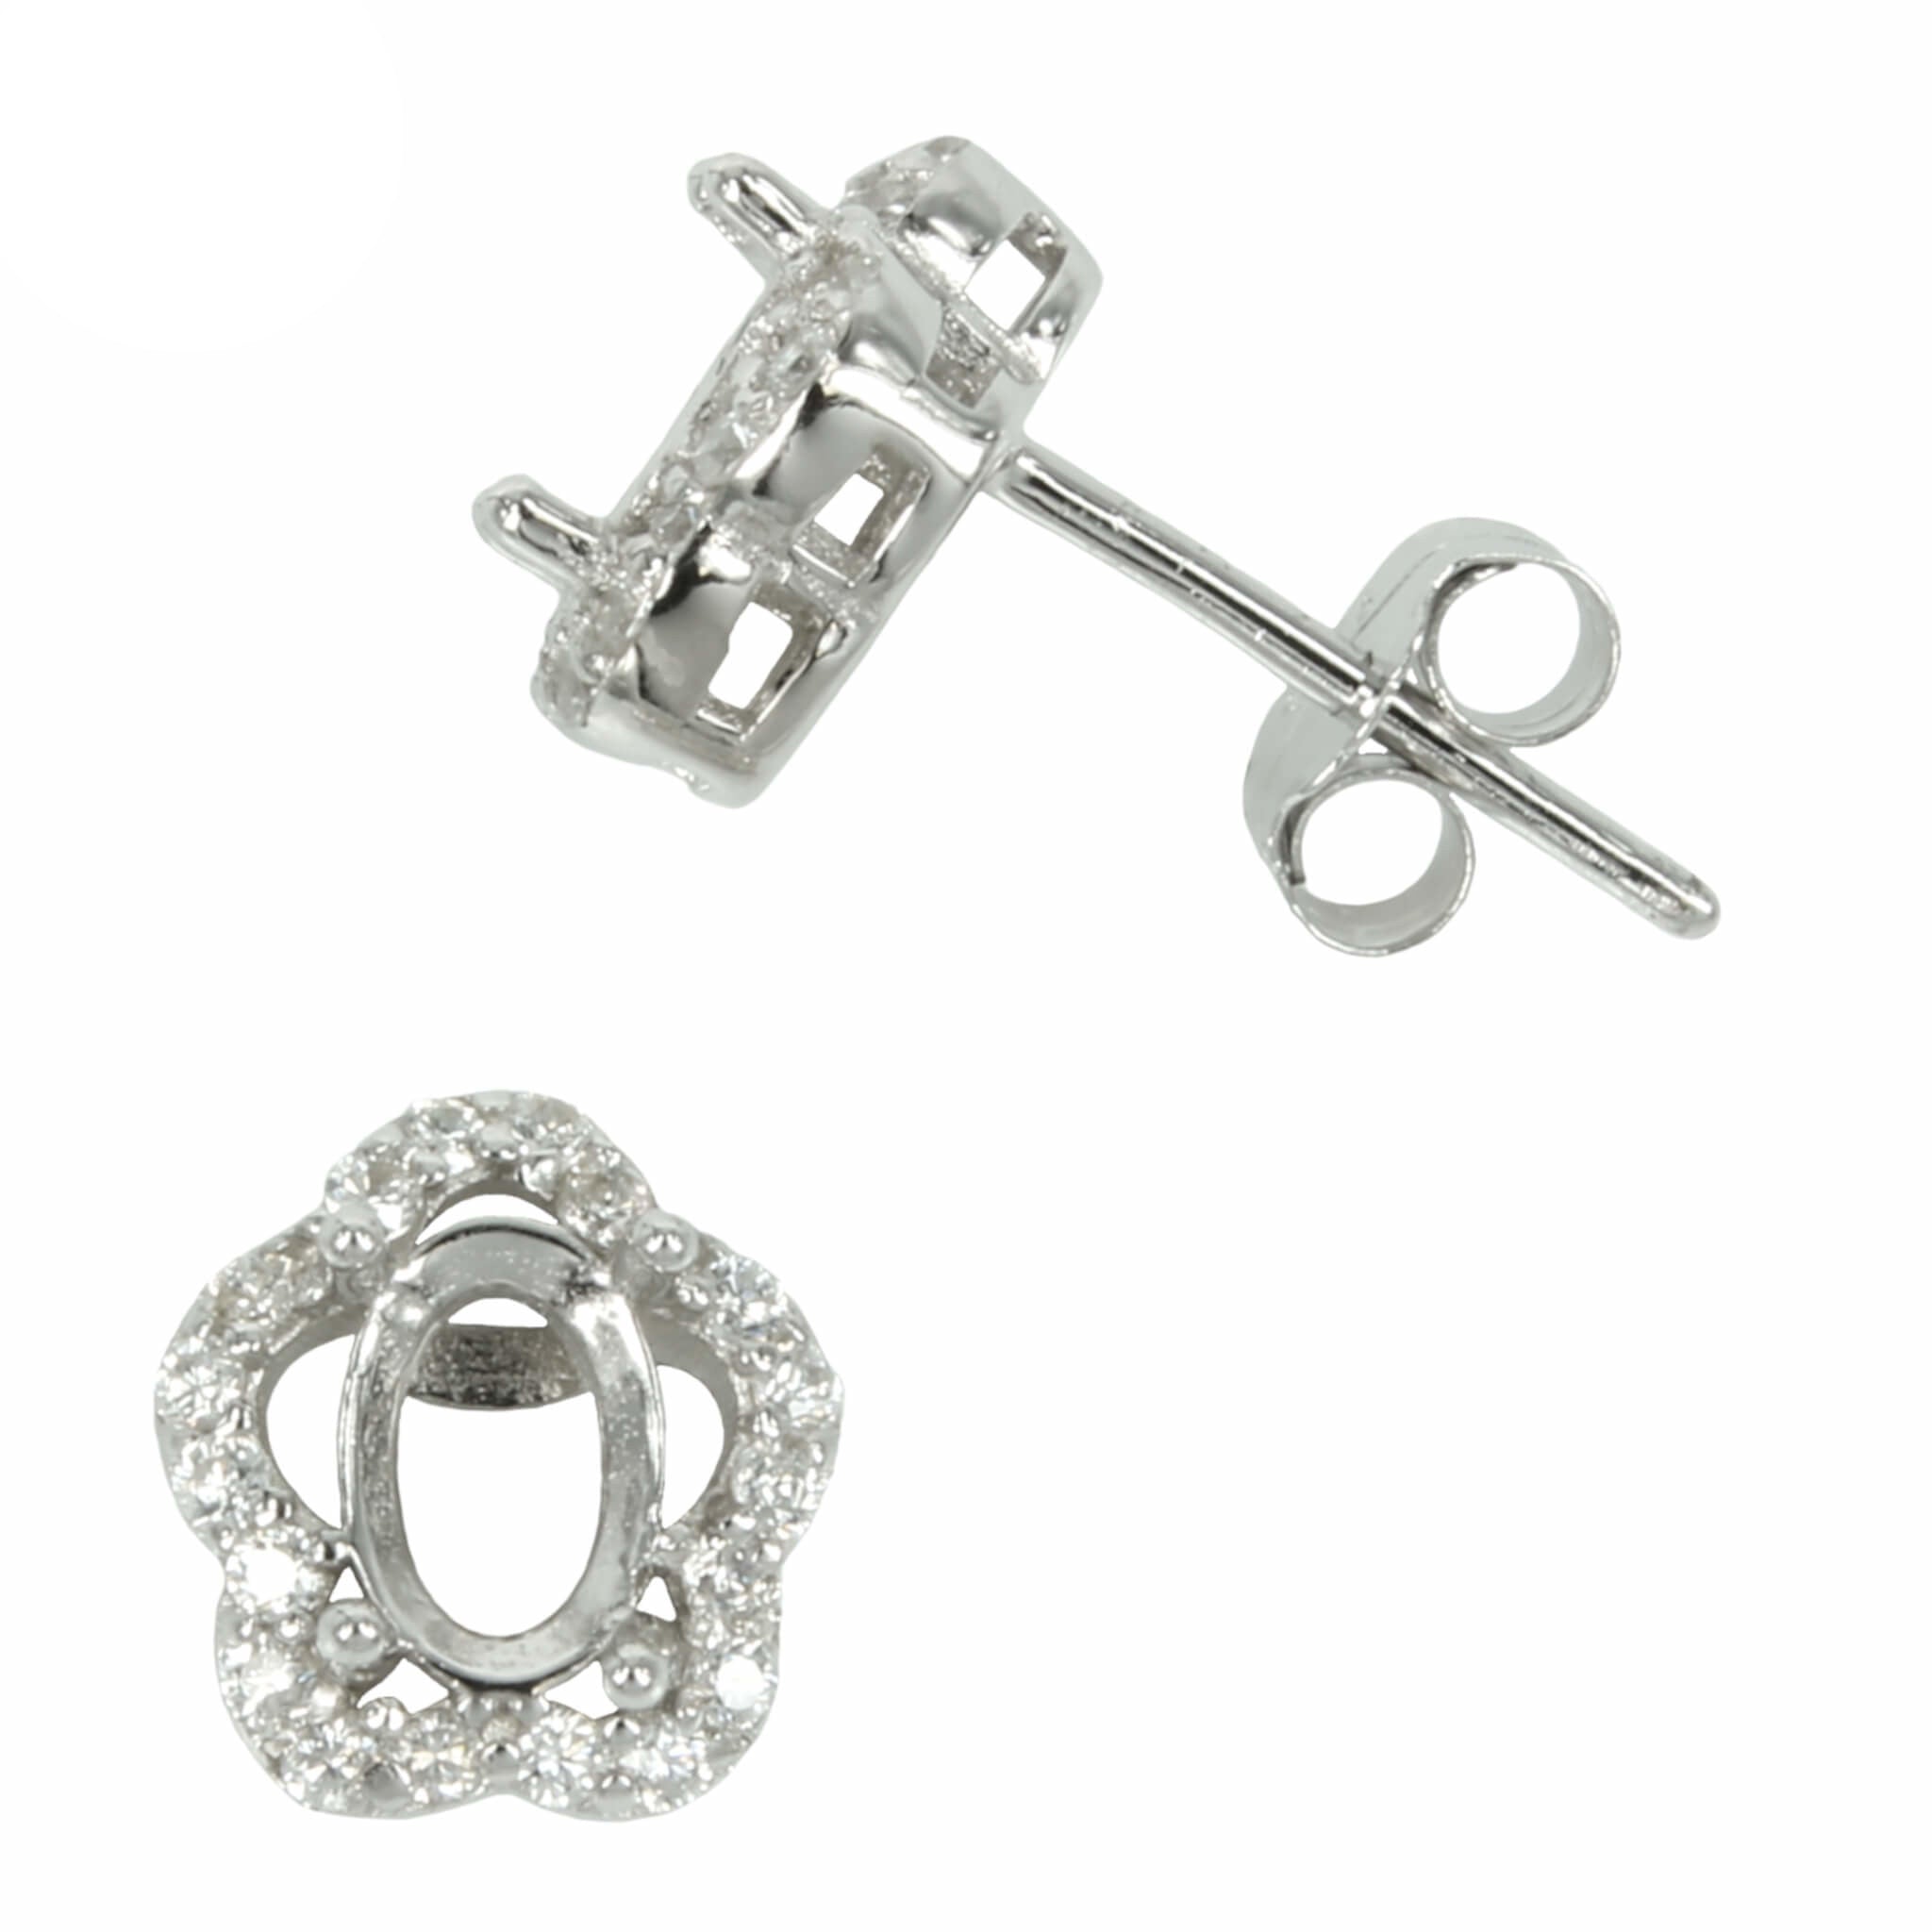 CZ Flower Halo Stud Earrings with Oval Prong Mounting in Sterling Silver for 4x6mm Stones